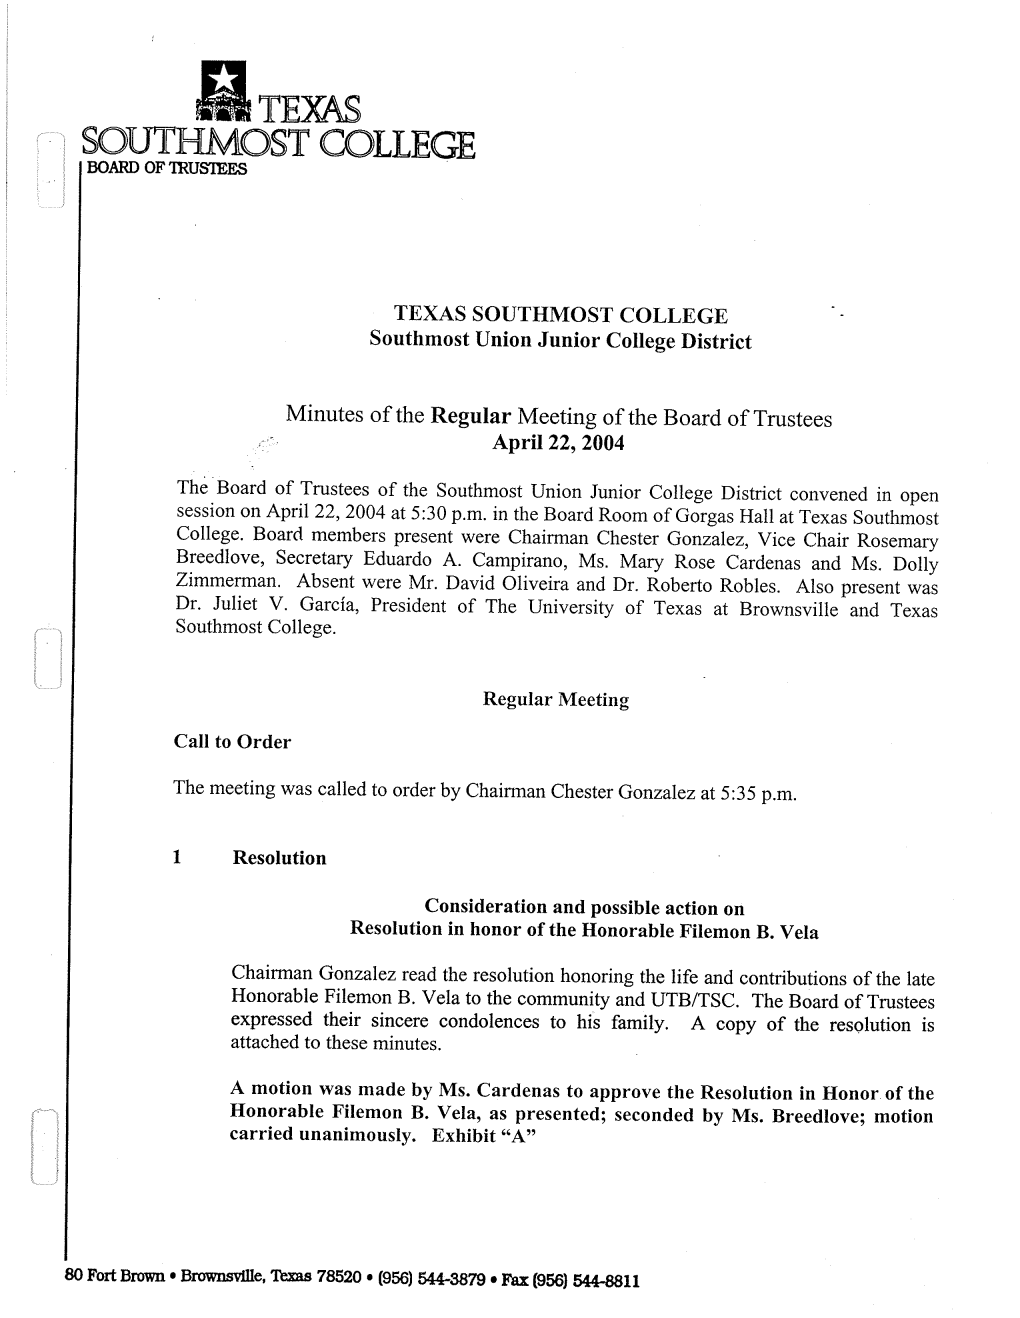 Minutes of the Regular Meeting of the Board of Trustees April 22,2004